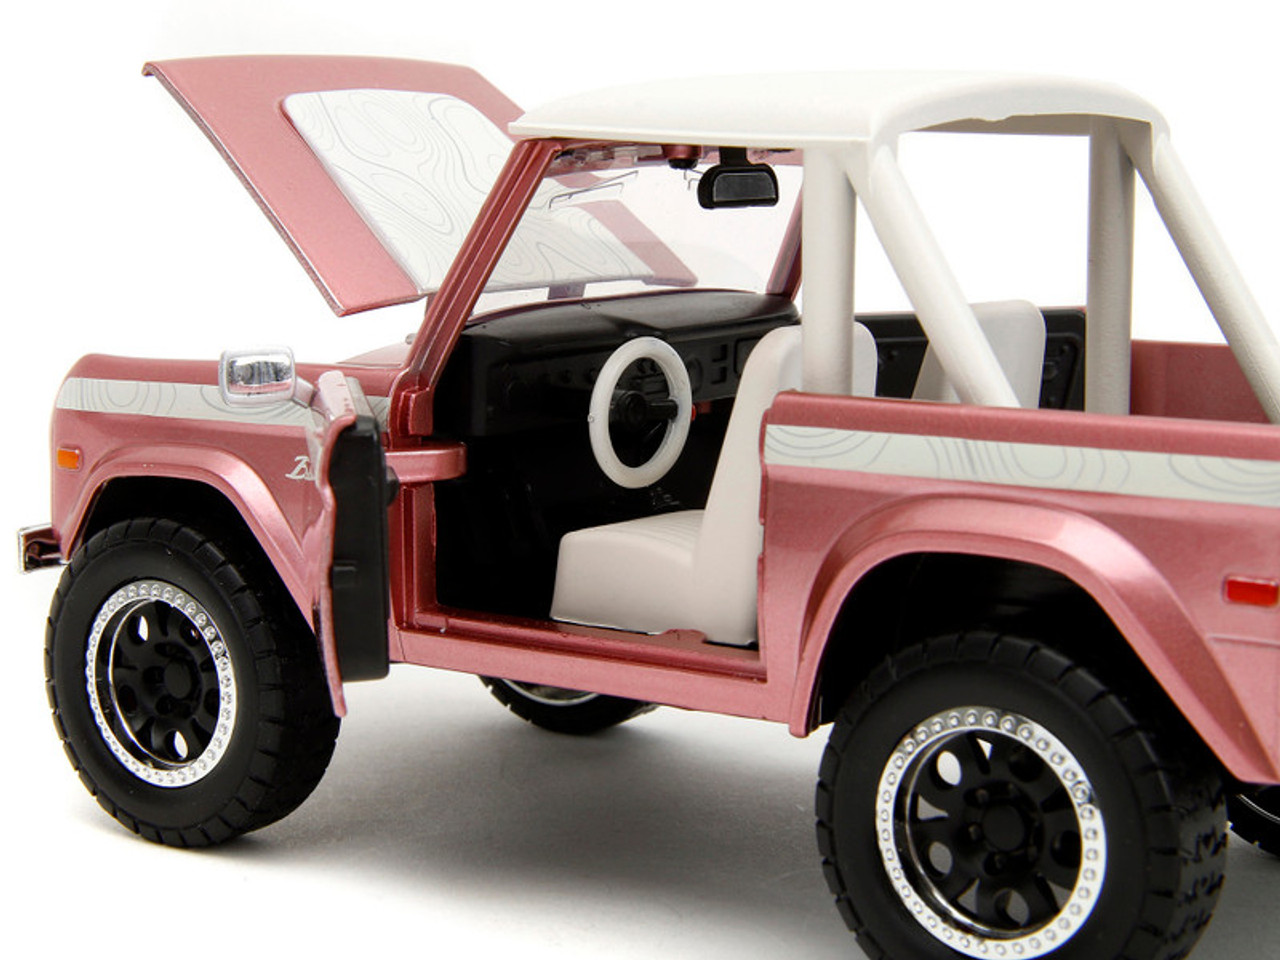 1973 Ford Bronco Pink Metallic with White Top and Graphics "Pink Slips" Series 1/24 Diecast Model Car by Jada